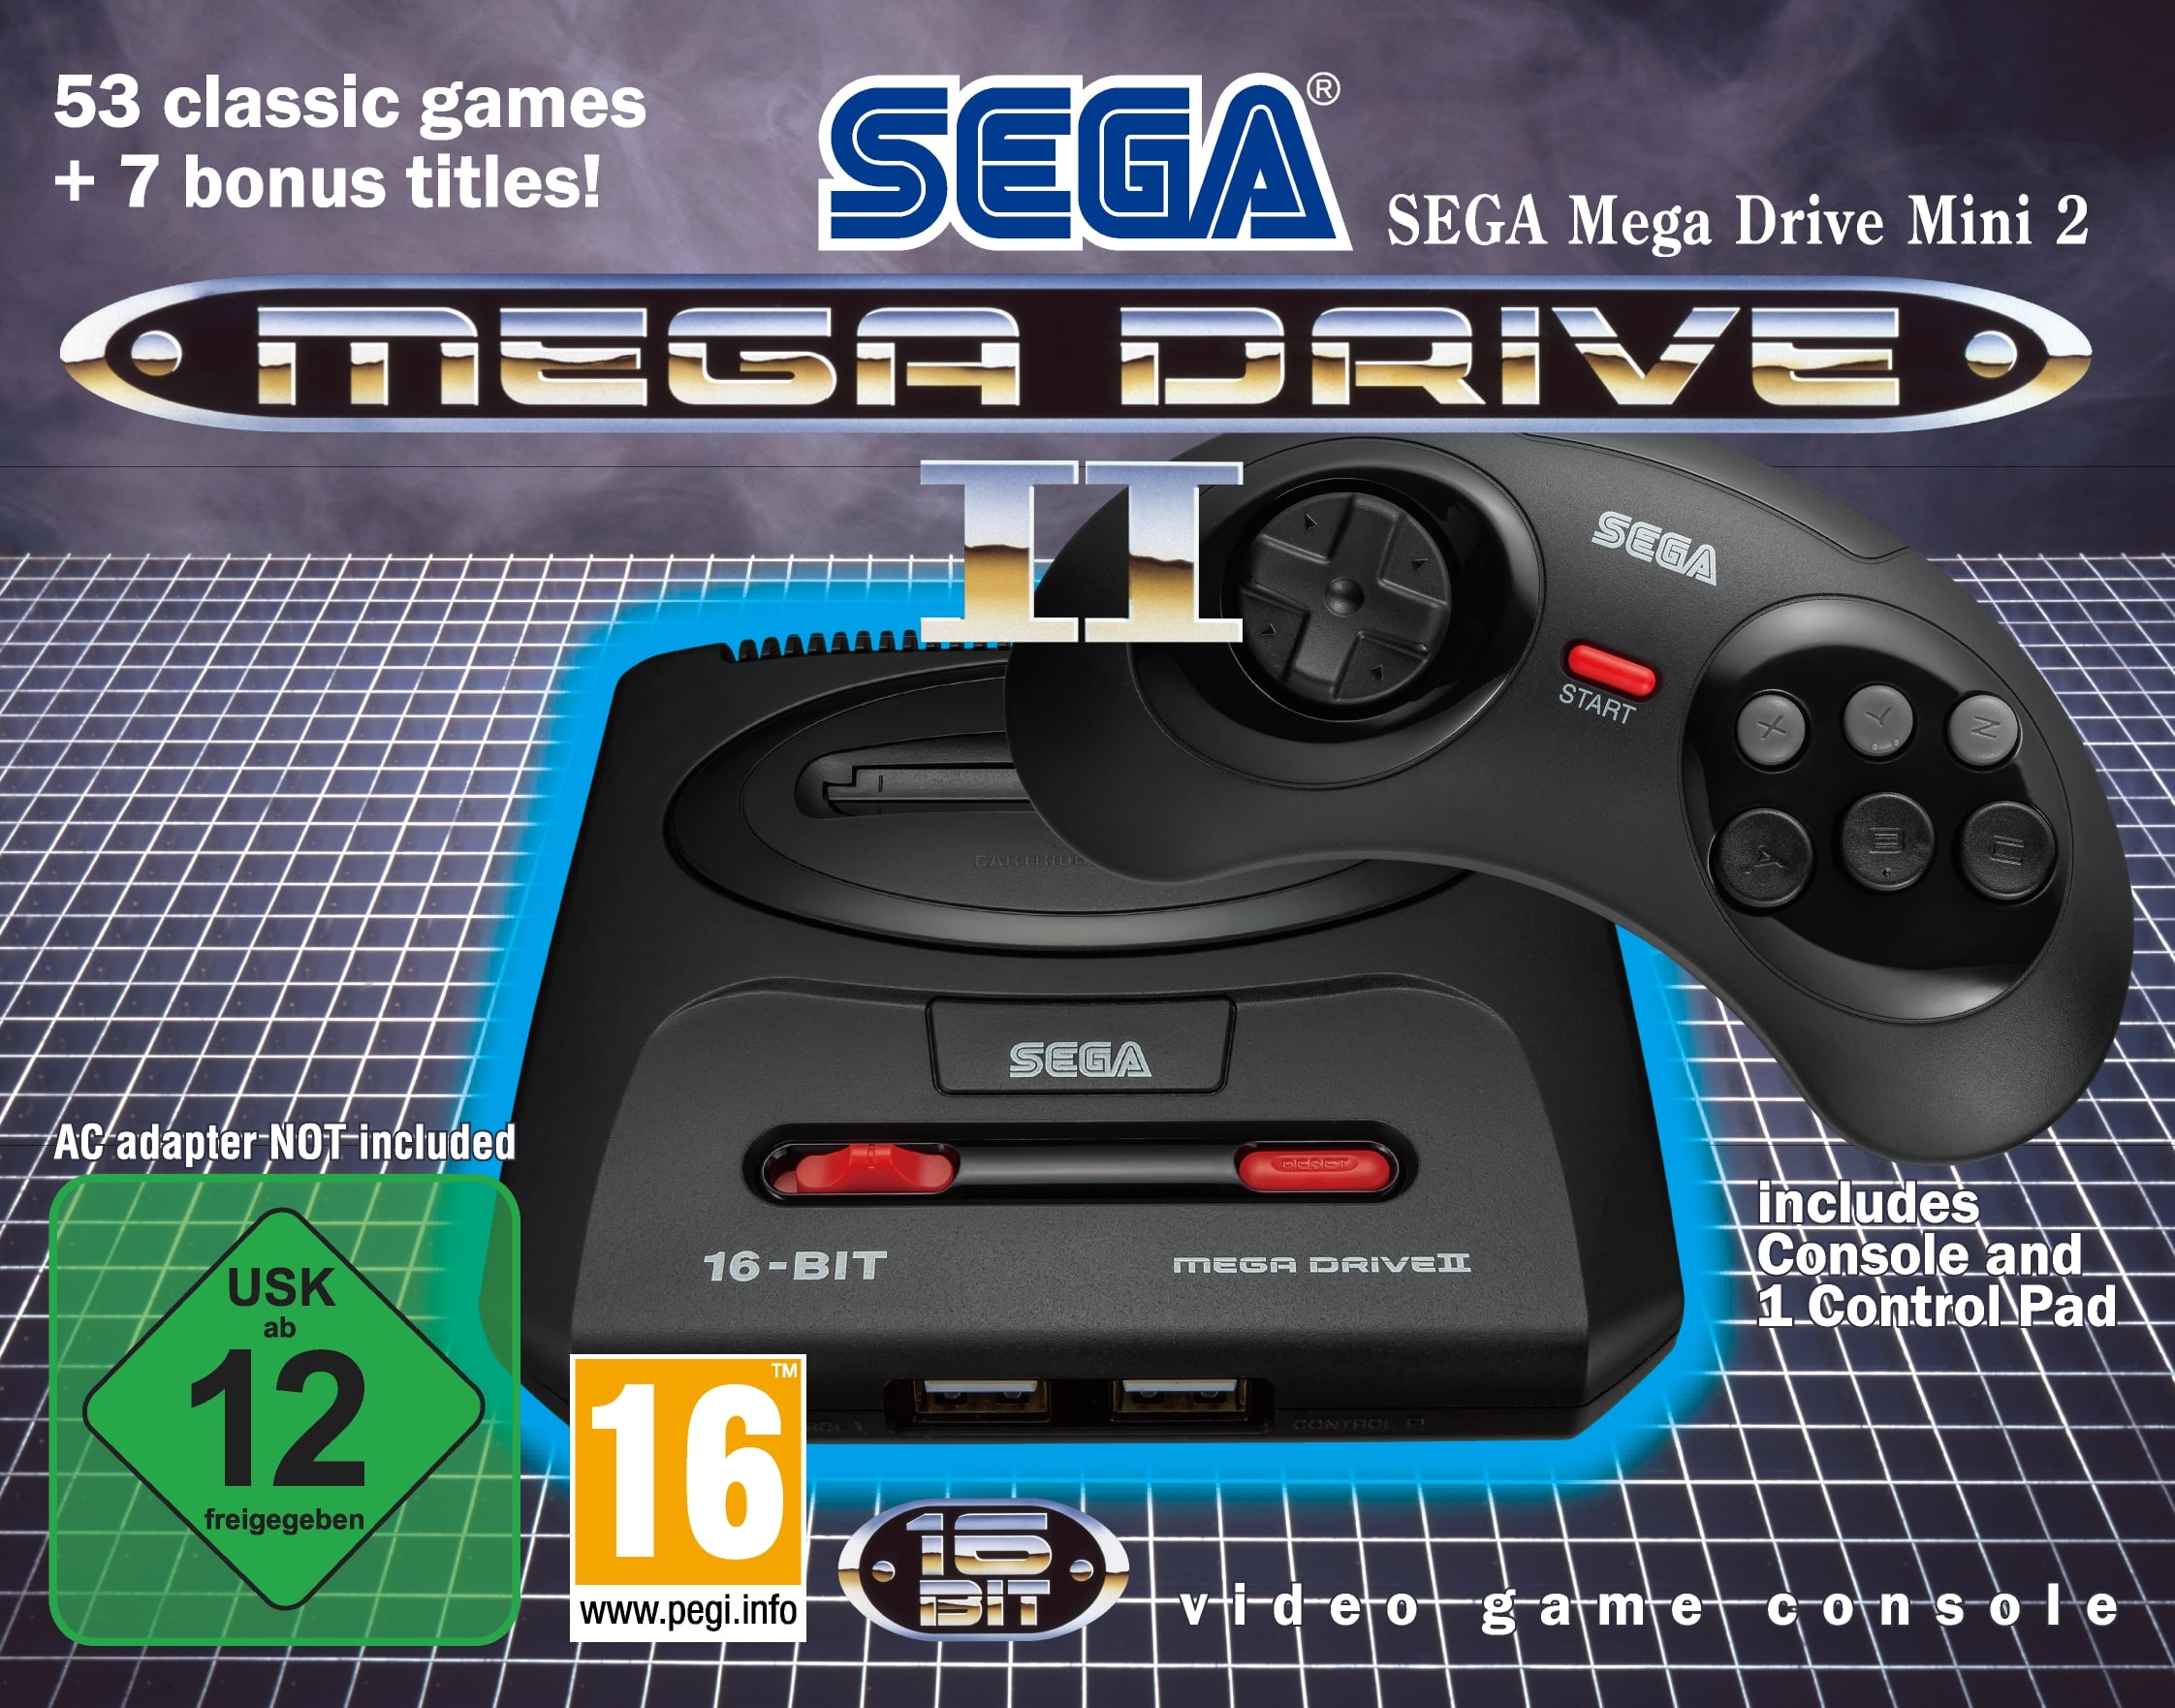 The Sega Mega Drive Mini 2 is accepting preorders in Europe now